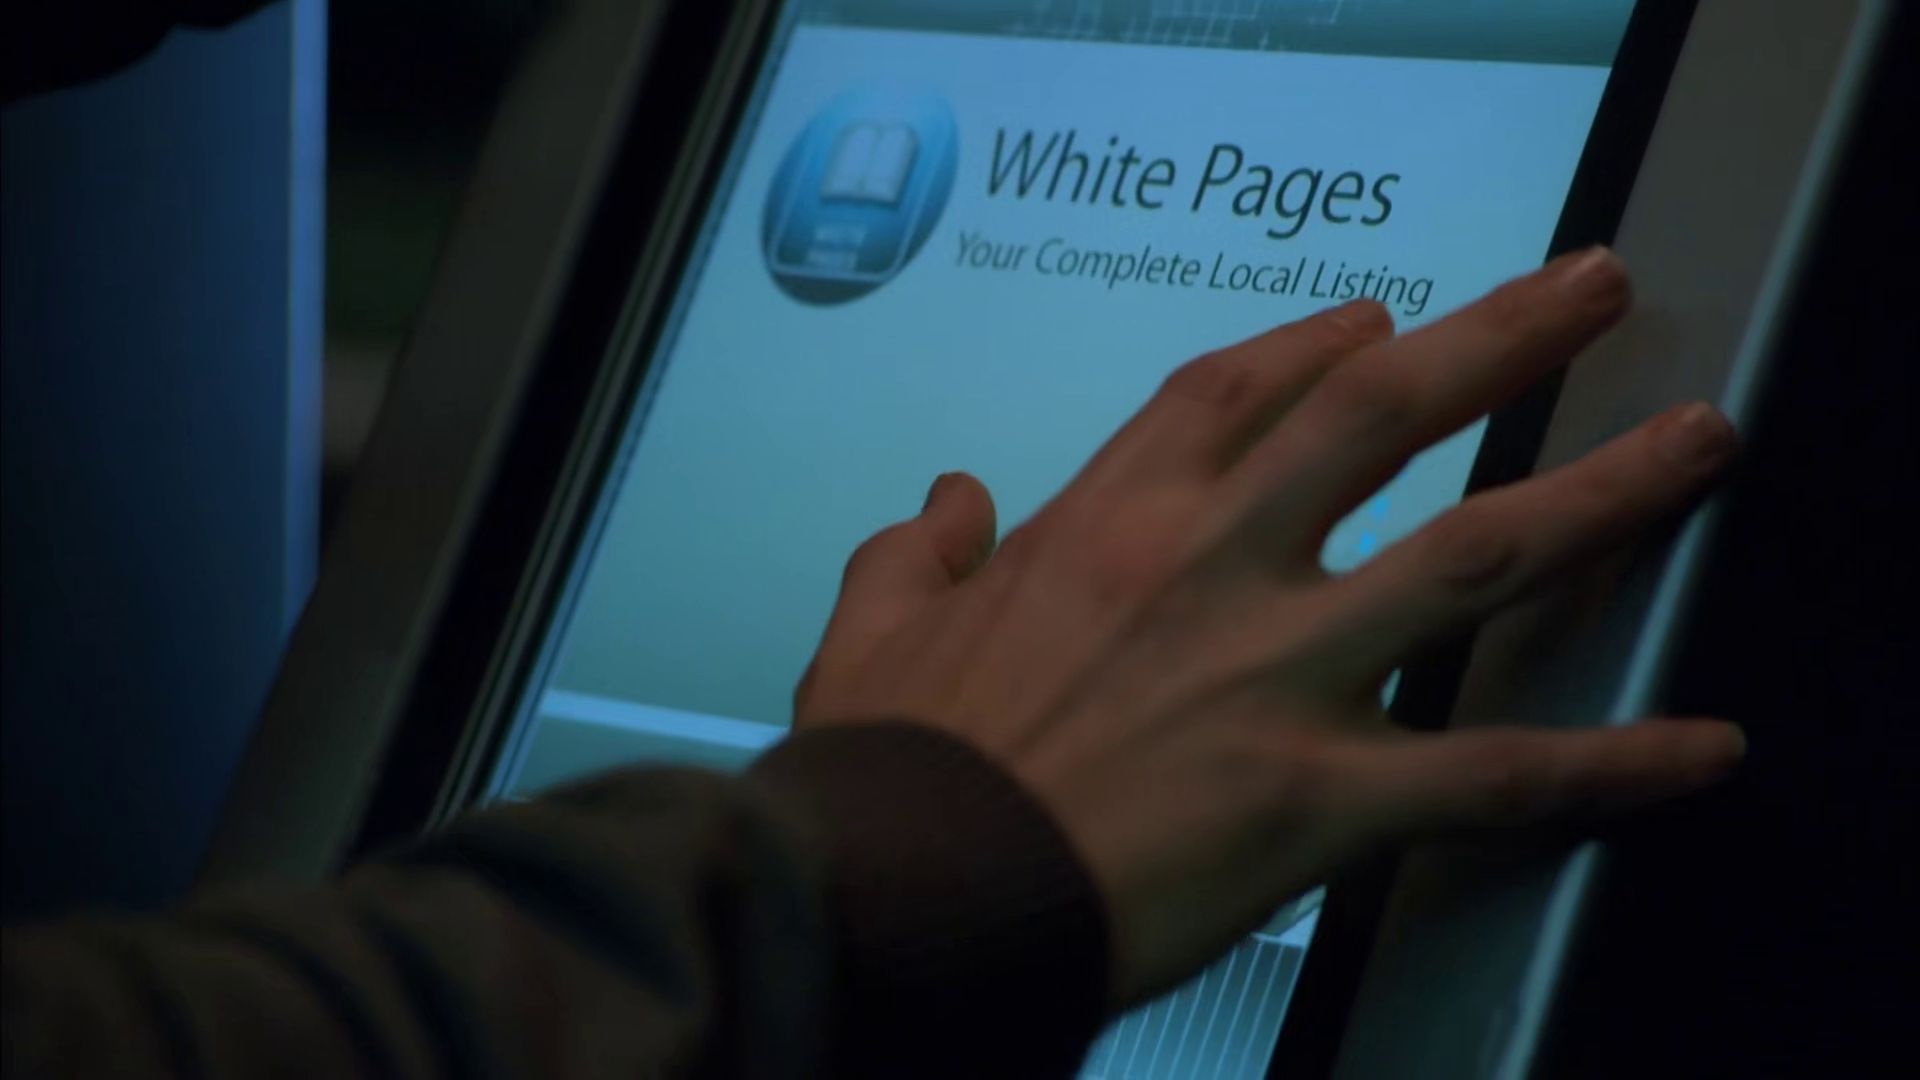 Difference: The White Pages